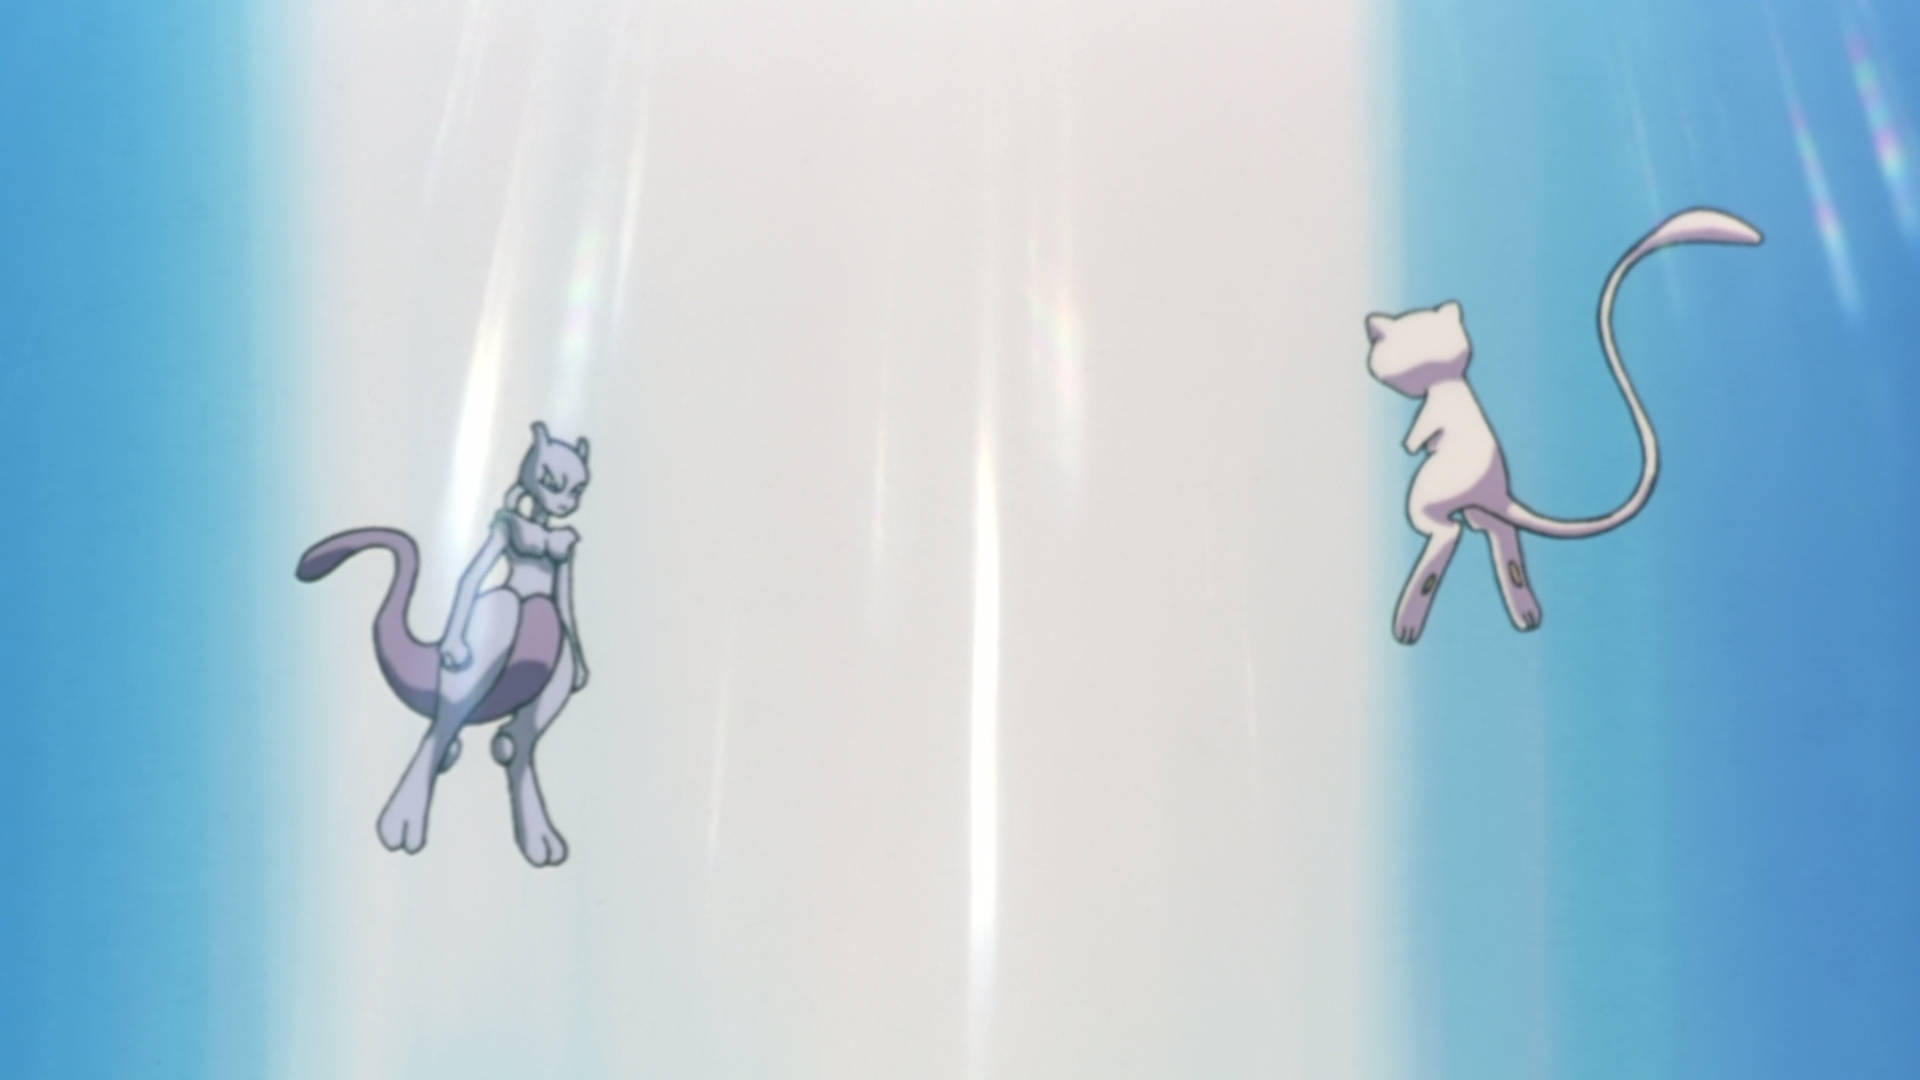 Mewtwo And Mew In Pokemon Battle Background